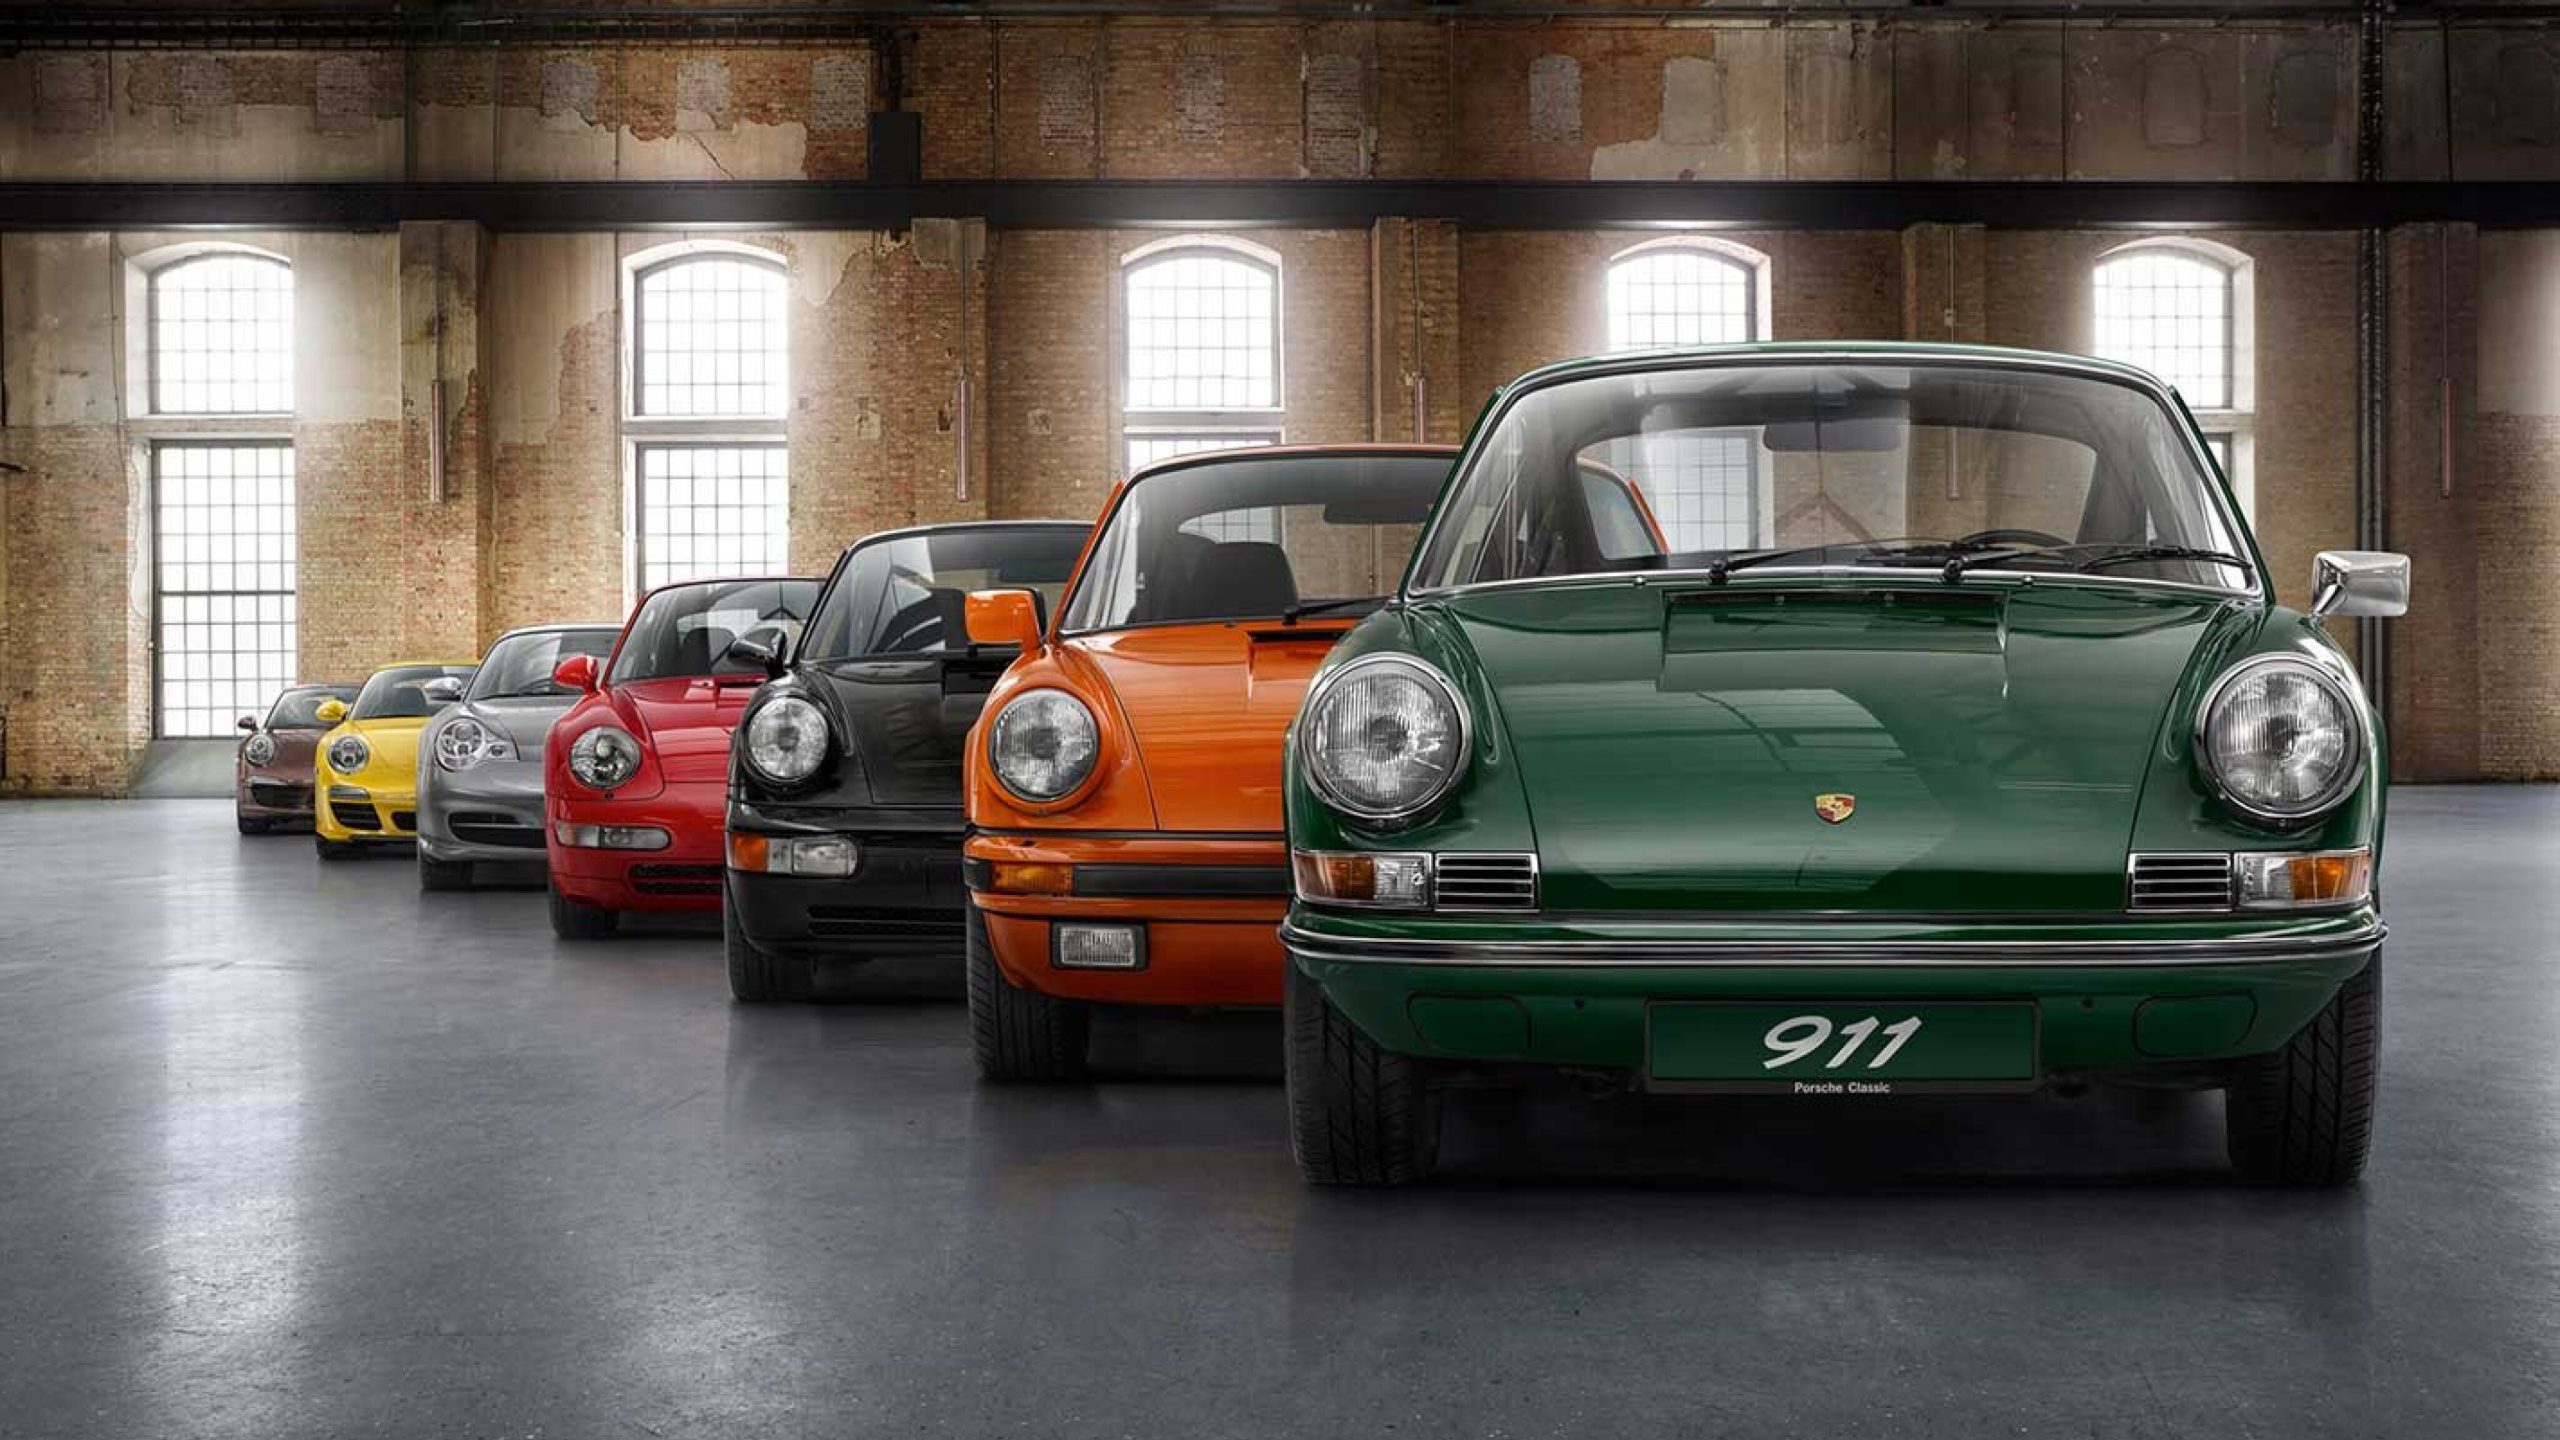 Image showing seven generations of the Porsche 911